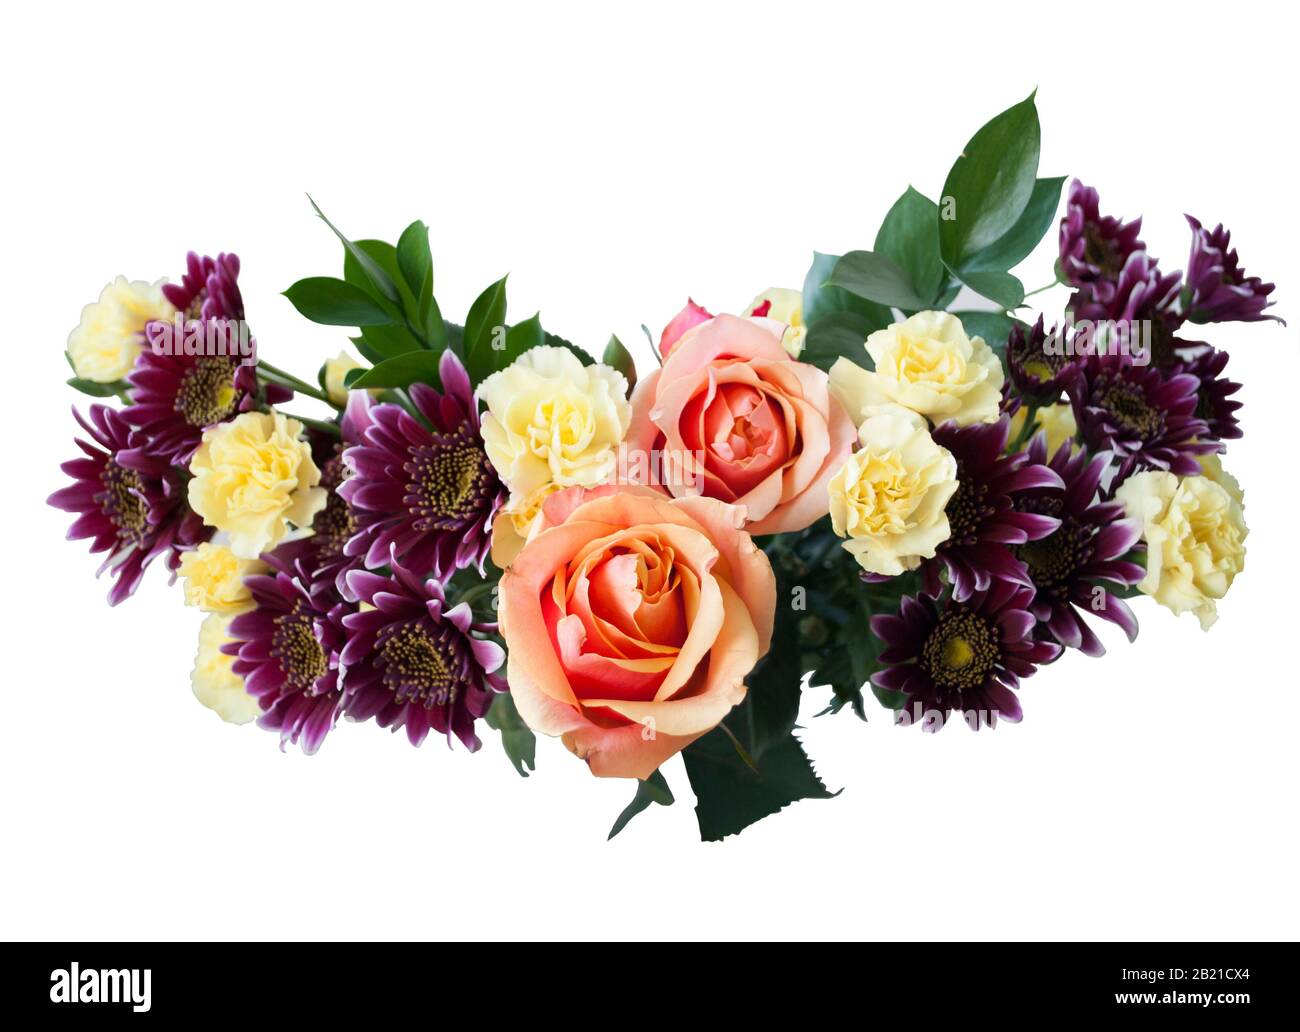 Bouquet of roses and chrysanthemums isolates on white. Stock Photo